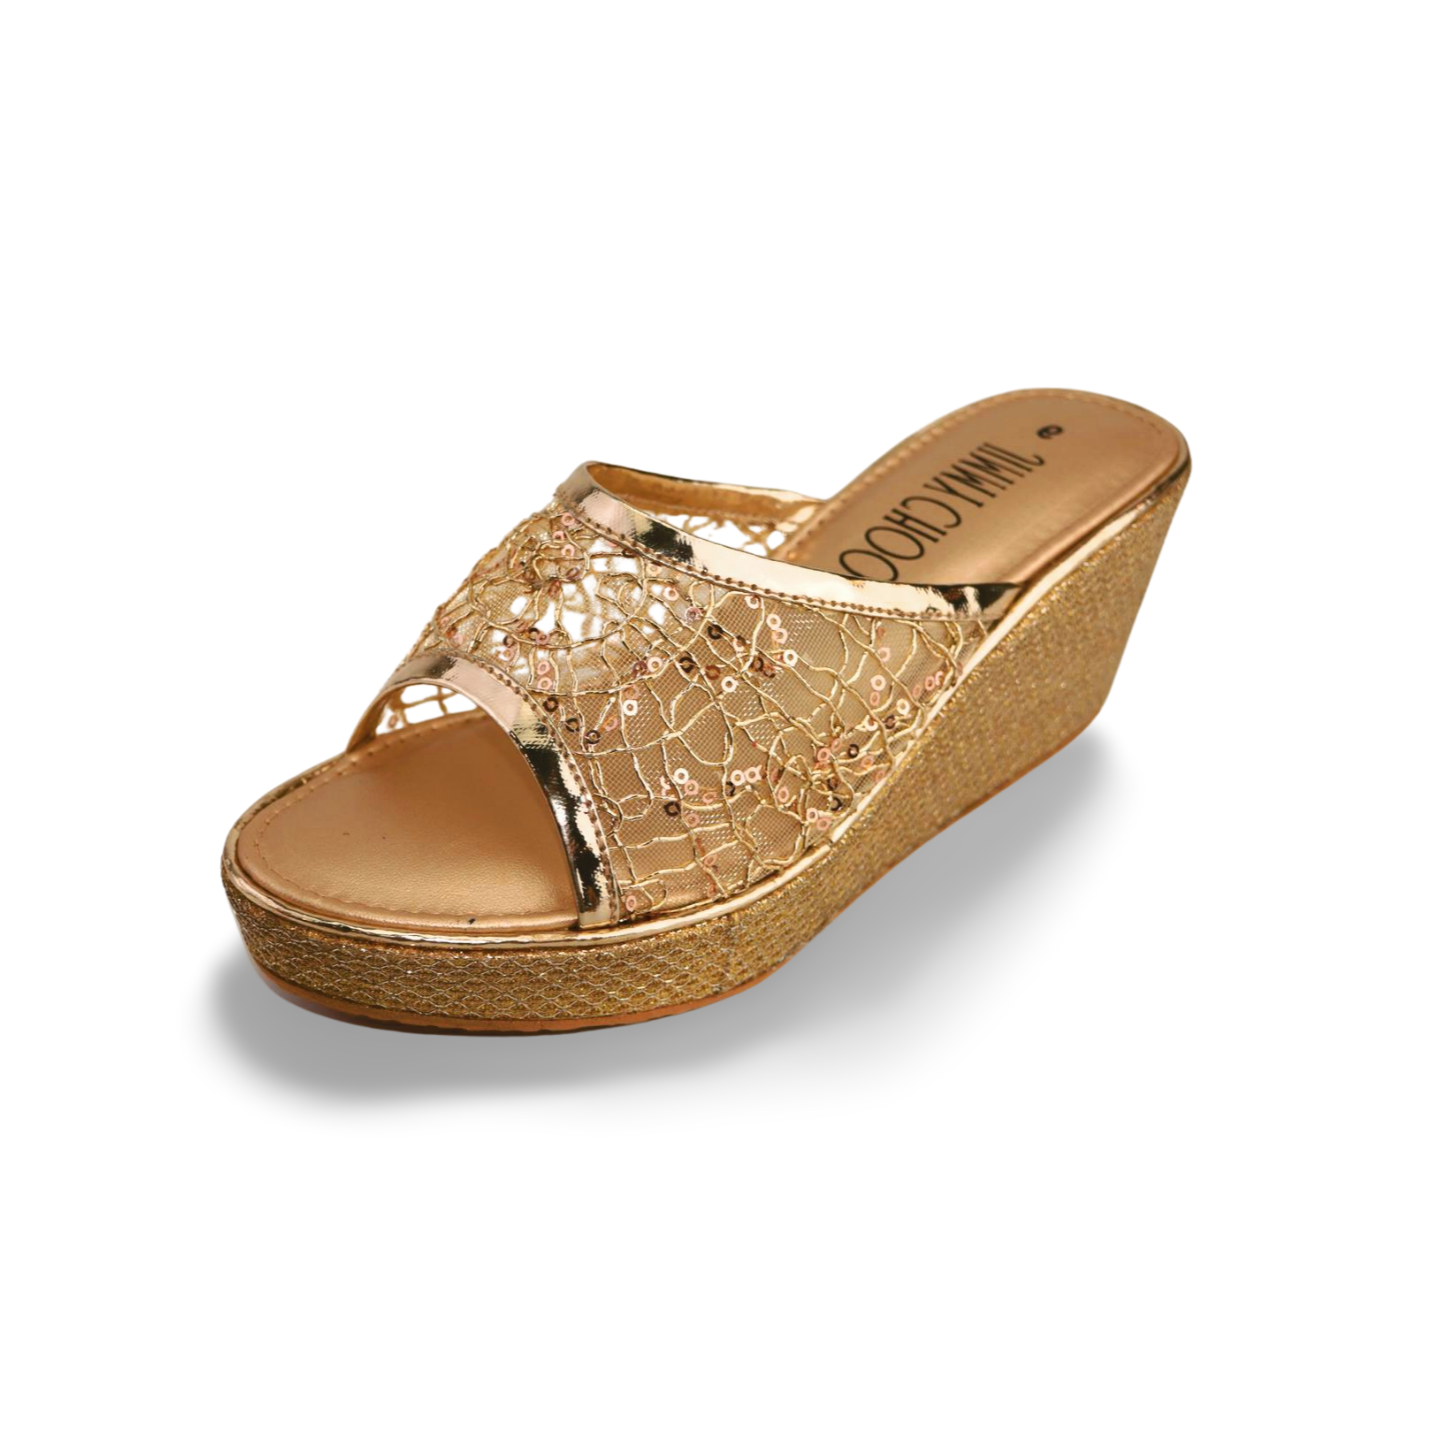 Women's Wedge Sandals with Lace and Sequins